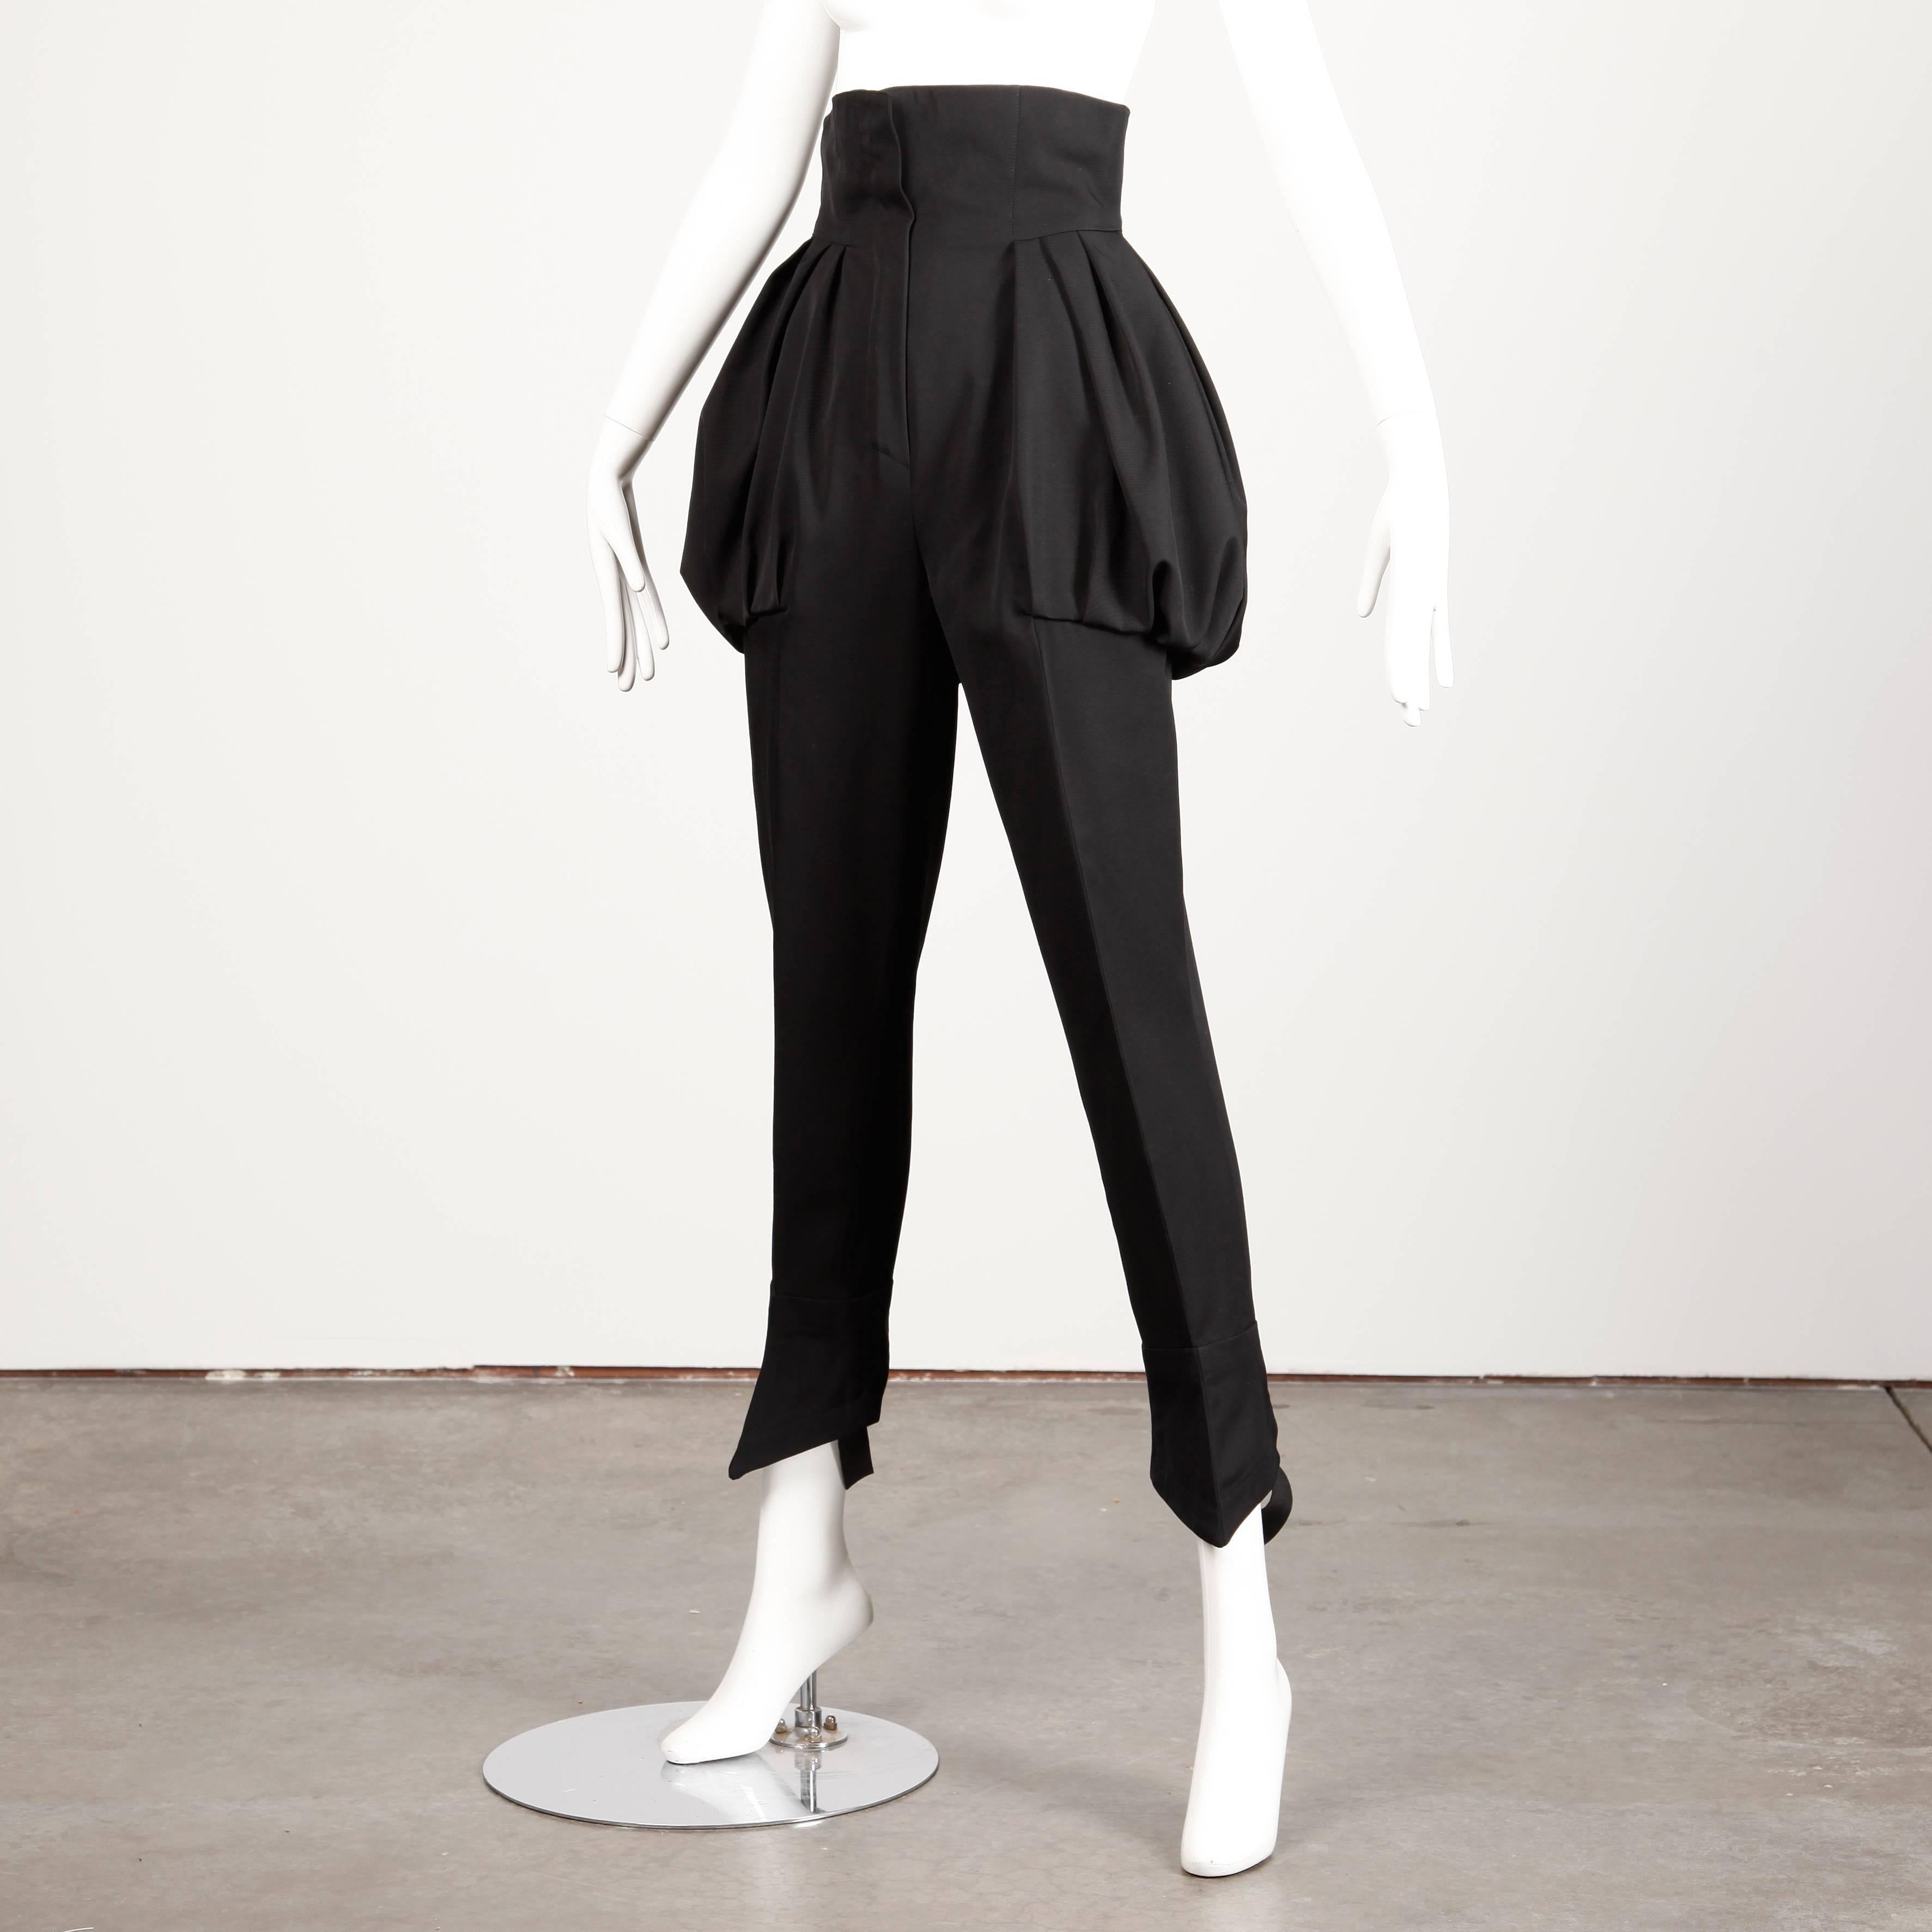 Extremely rare vintage 1980s black wool stirrup pants by Bernard Perris. Extraordinary avant garde shape with a high waist and voluminous paper bag pockets. Stirrups are elastic and hook closed. 

Details: 

Partially Lined
Side Pockets
Front